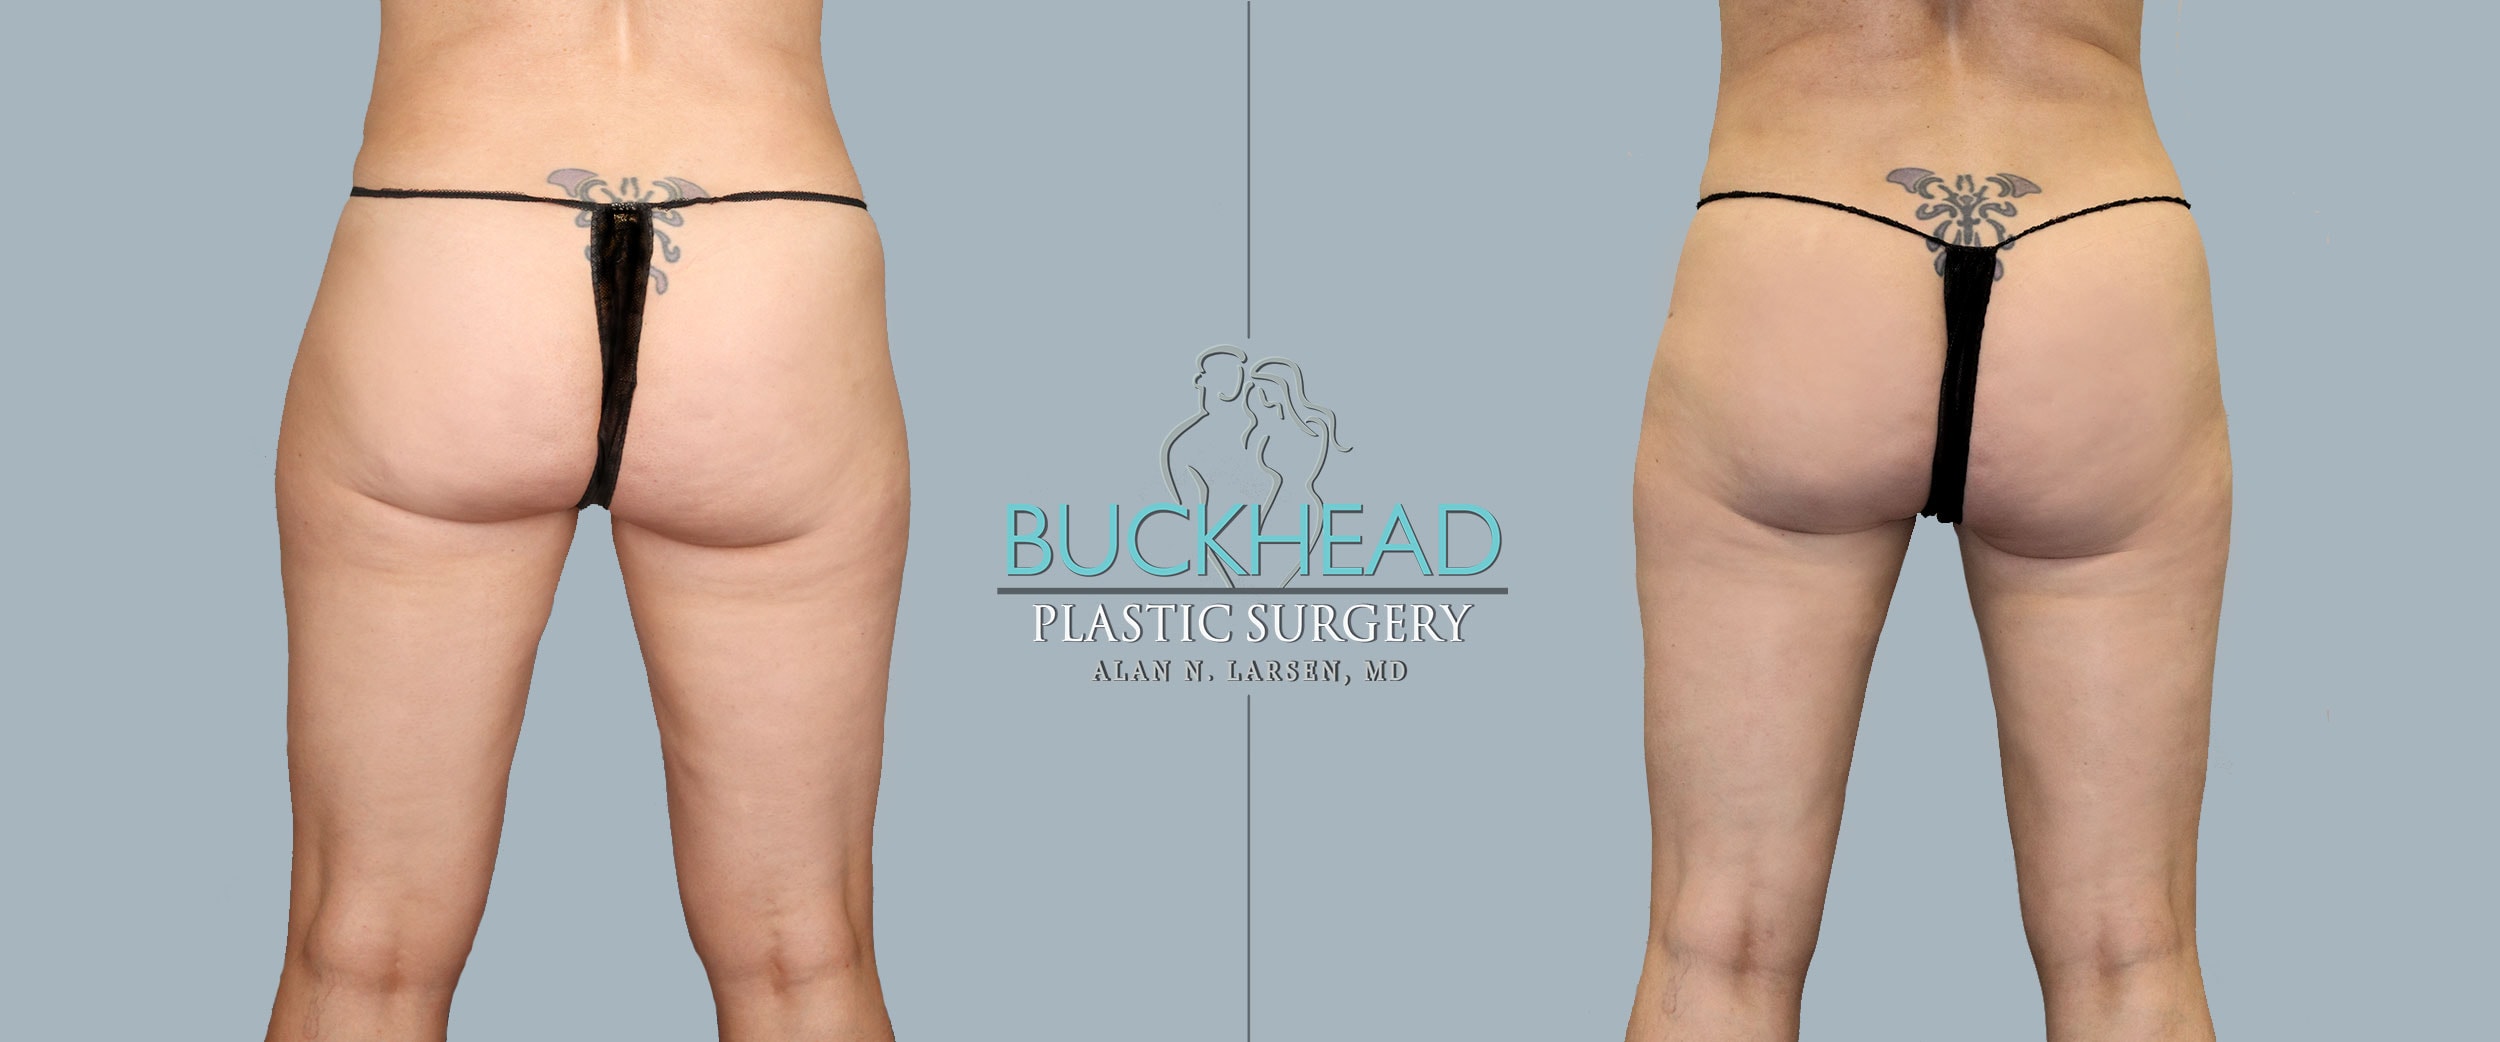 Before-and-After-Photo-Gallery-liposuction-Buckhead-Plastic-Surgery-Alan-N.-Larsen,-MD-Board-Certified-Plastic-Surgeon-Atlanta-GA-Inner-Thighs-Back